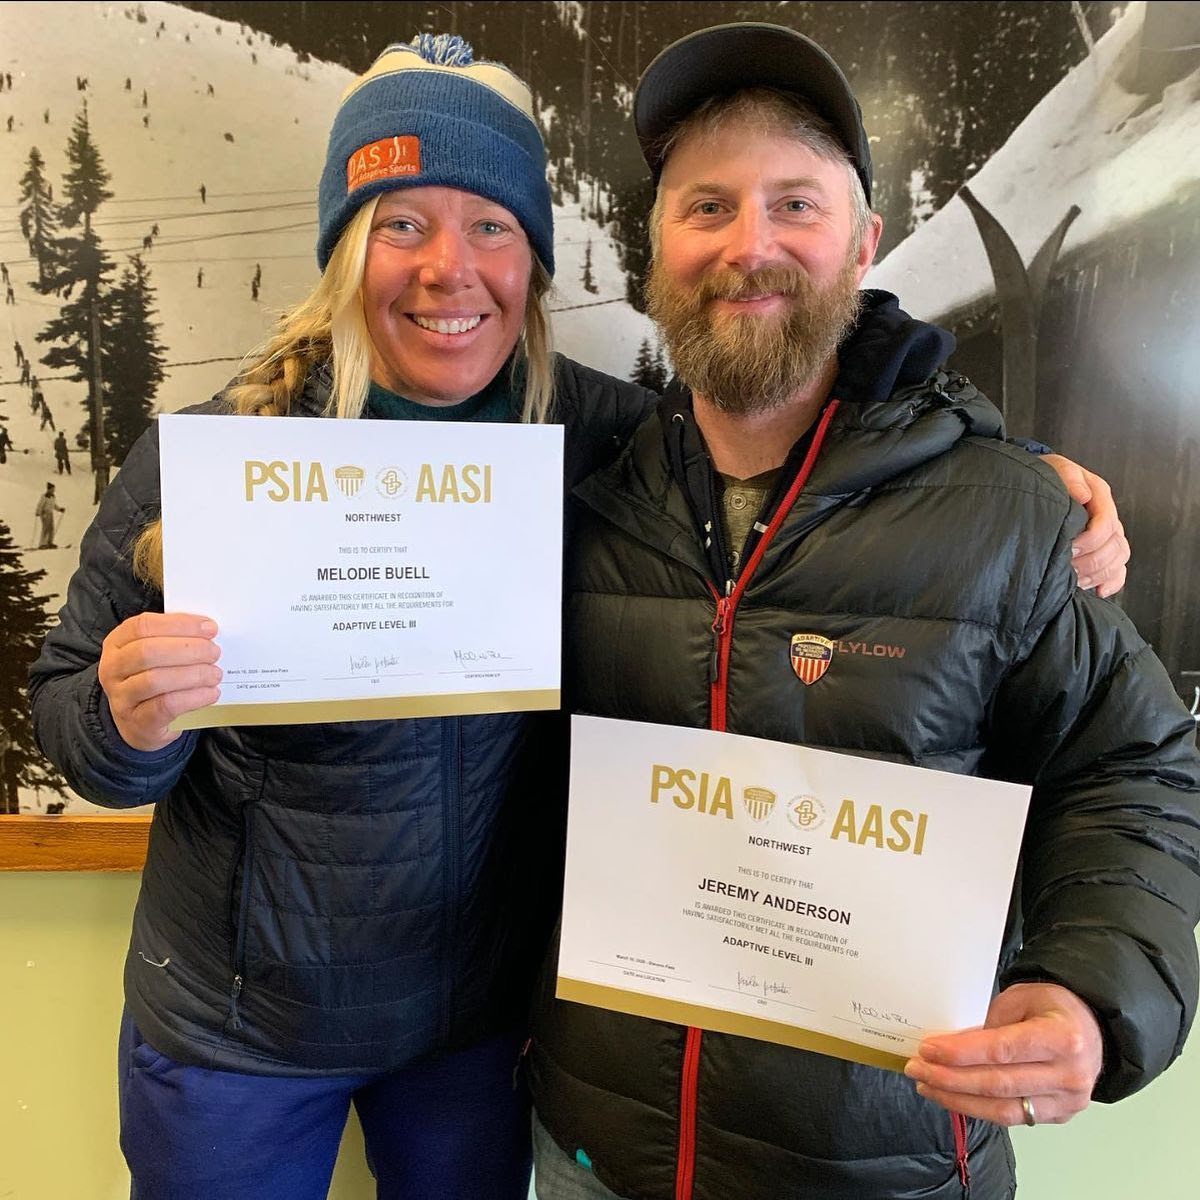 instructor melodie with jeremy of challenge alaska holding their certificates showing they are the first two people ever in the NW to get their PSIA level 3 adaptive certification